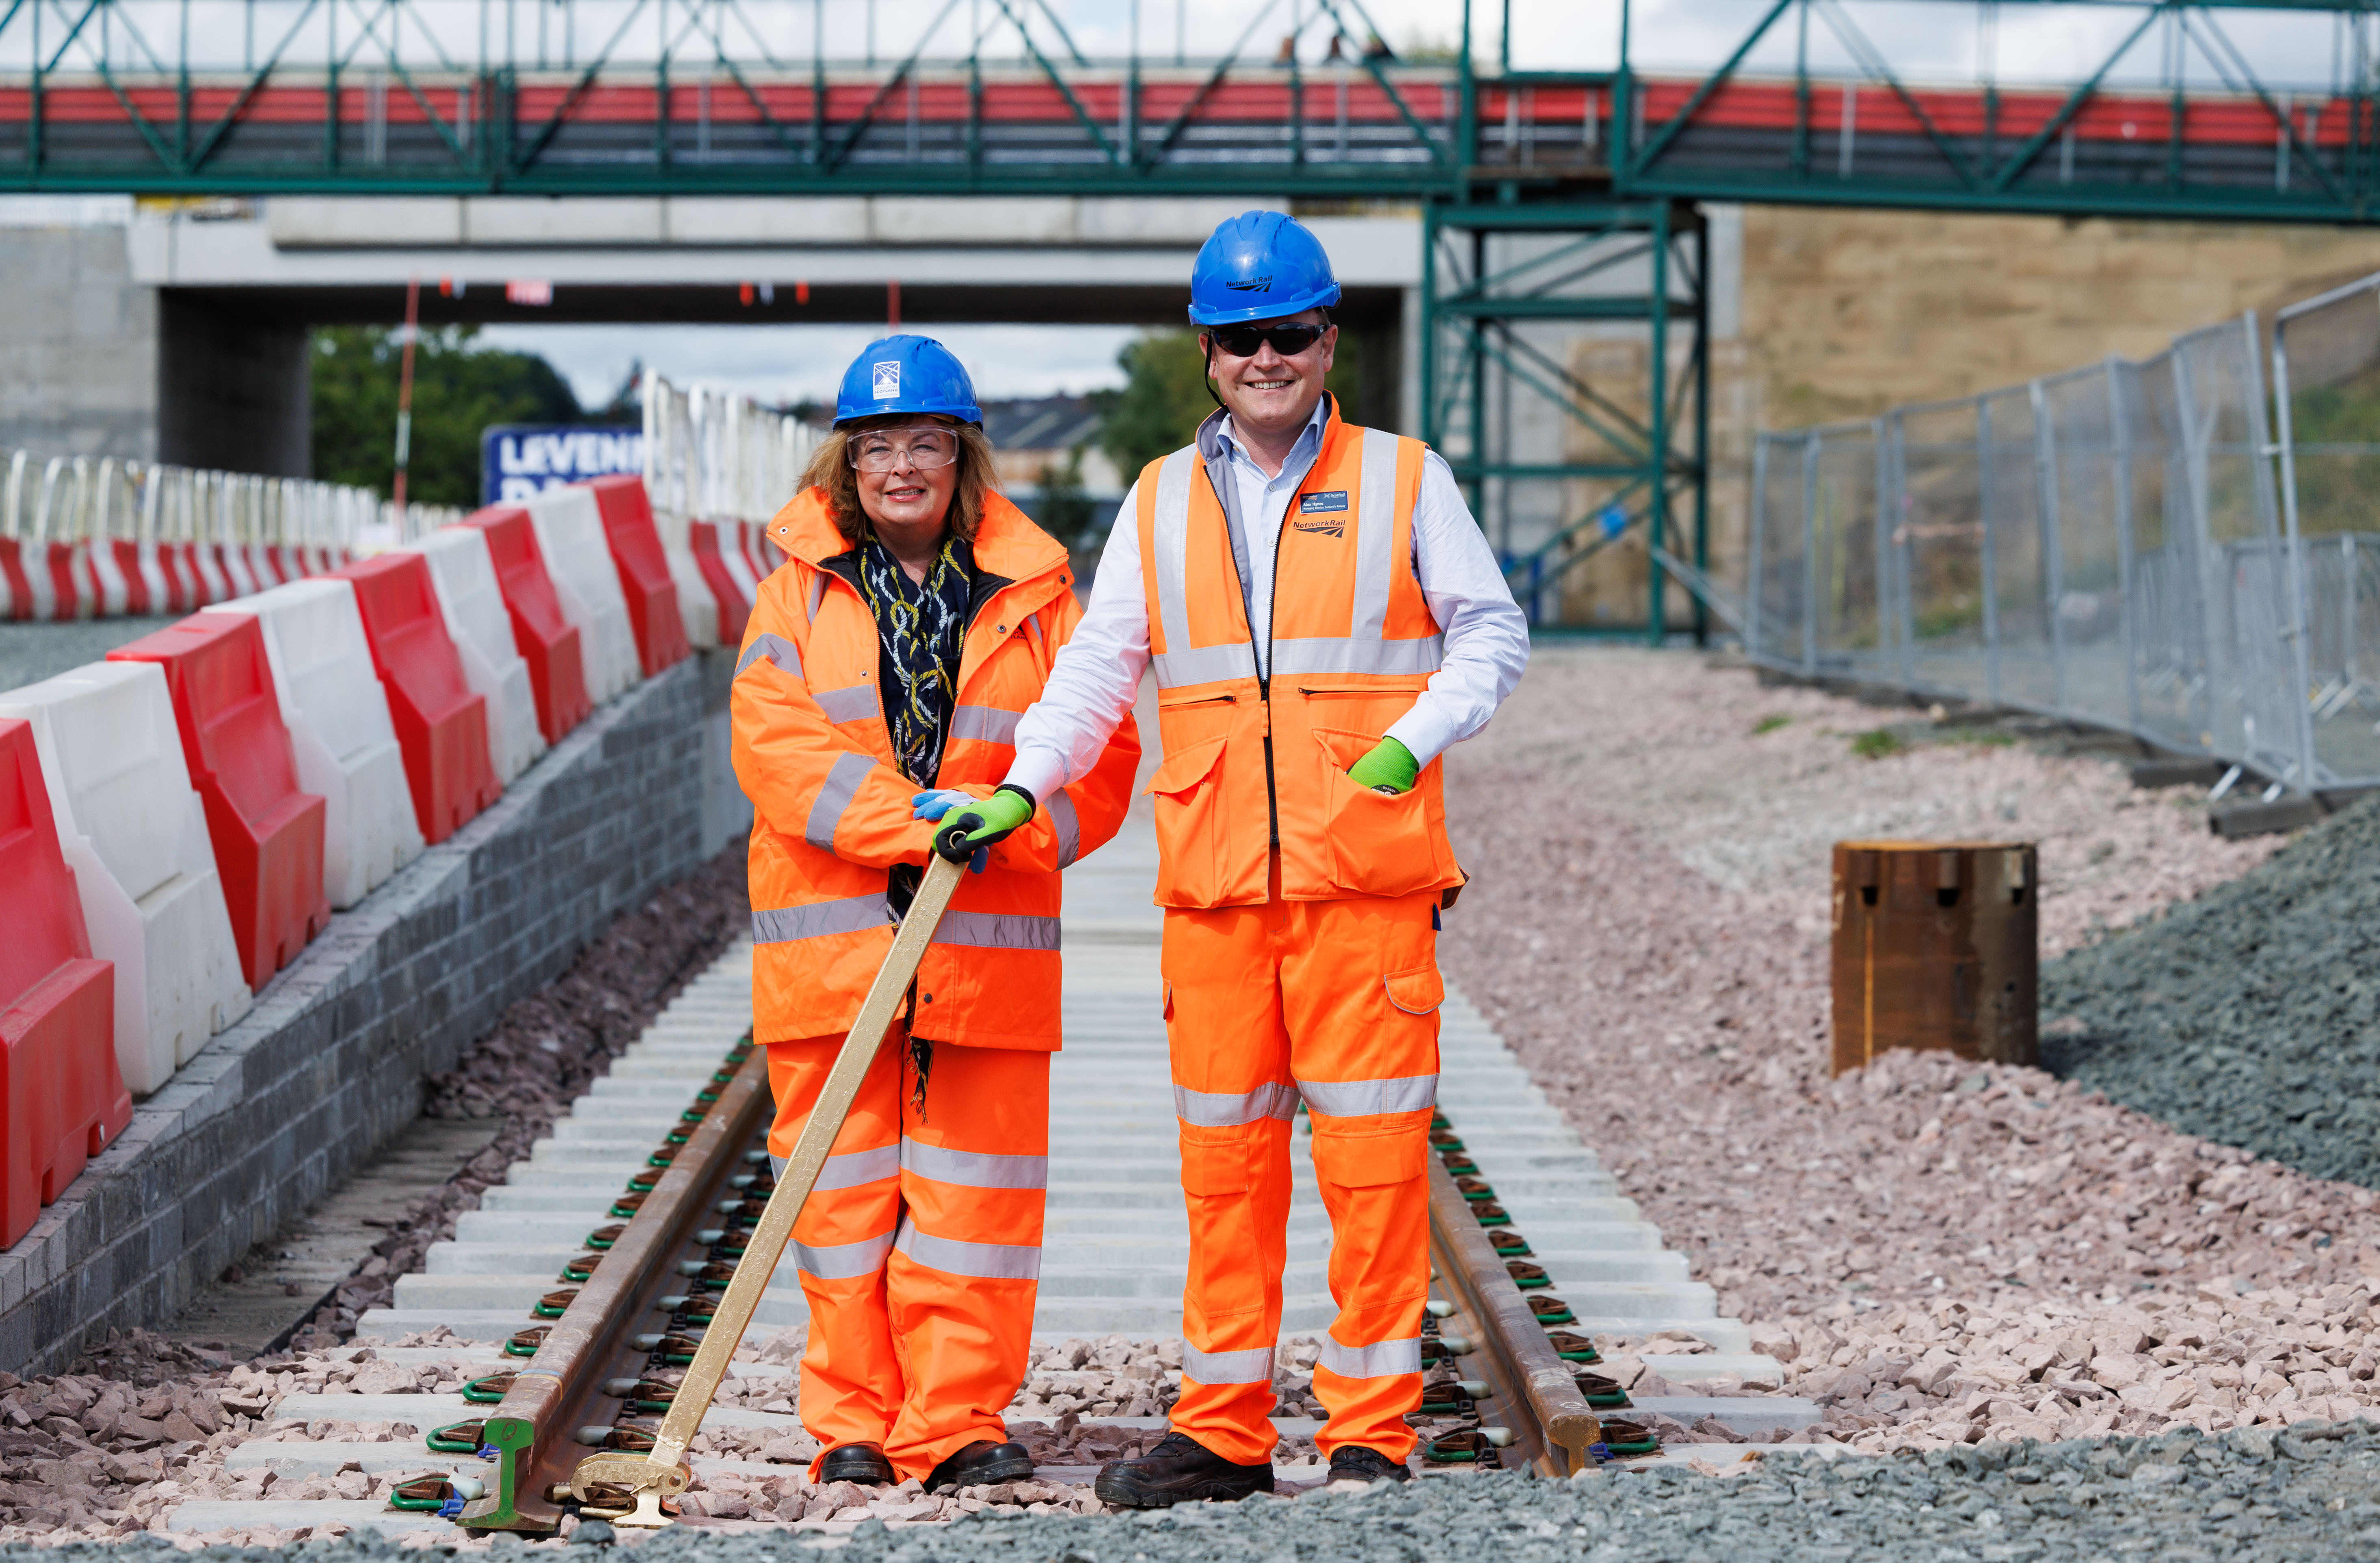 Transport Minister Fiona Hyslop marks completion of Leven track work